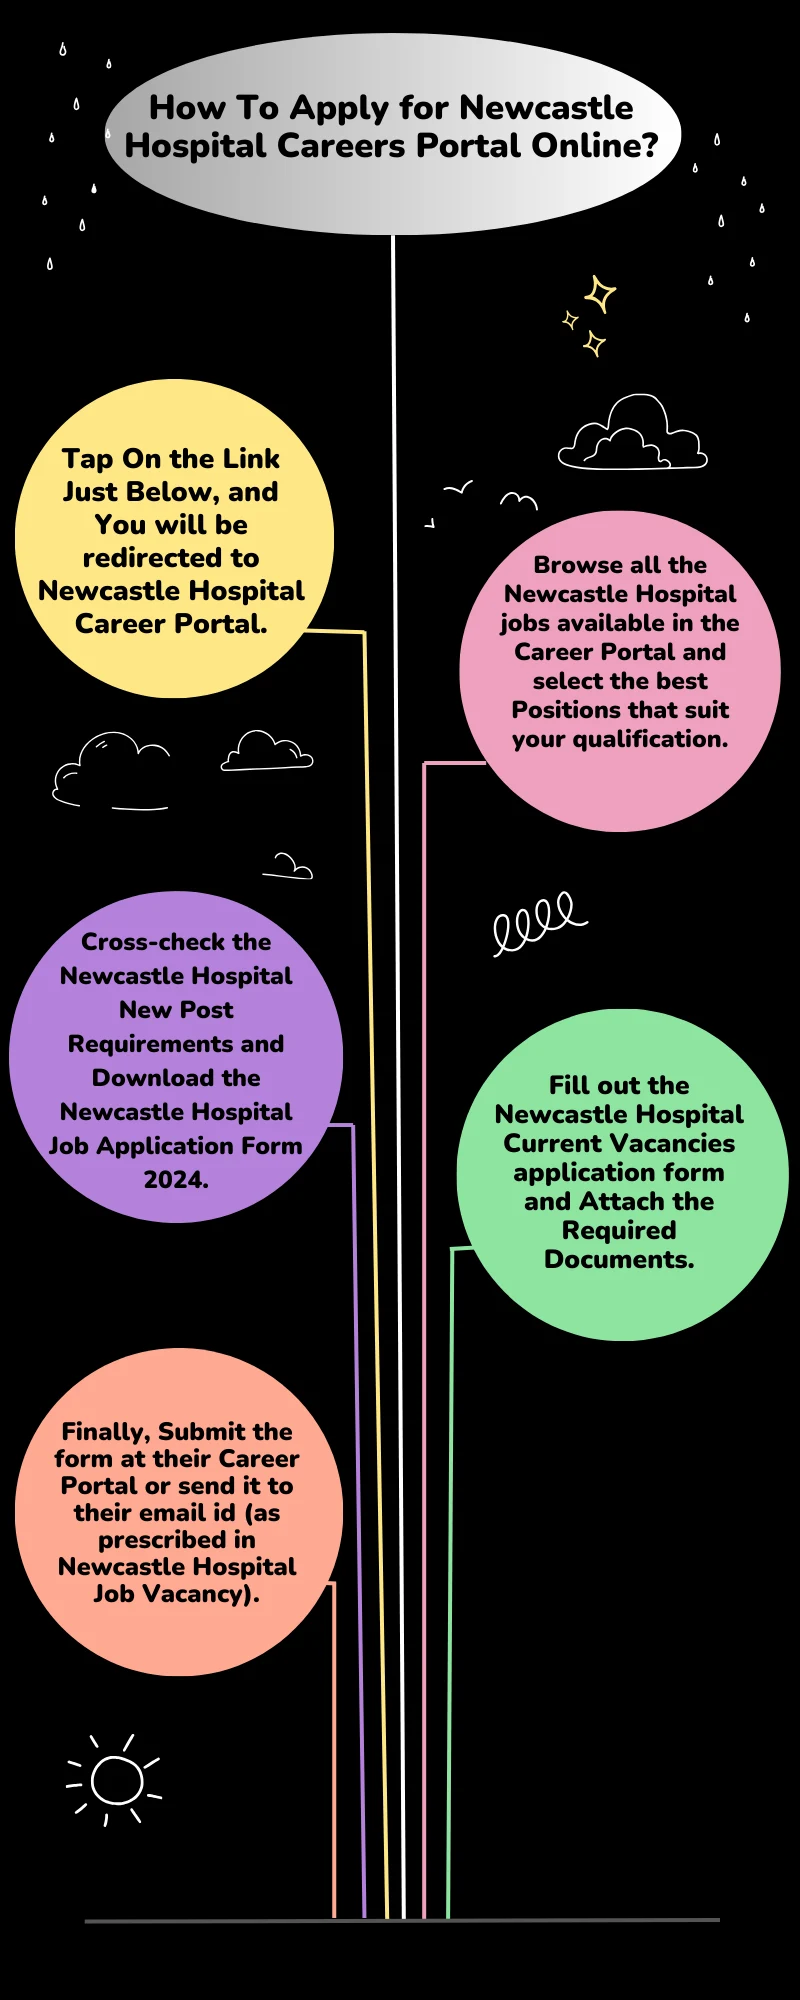 How To Apply for Newcastle Hospital Careers Portal Online?